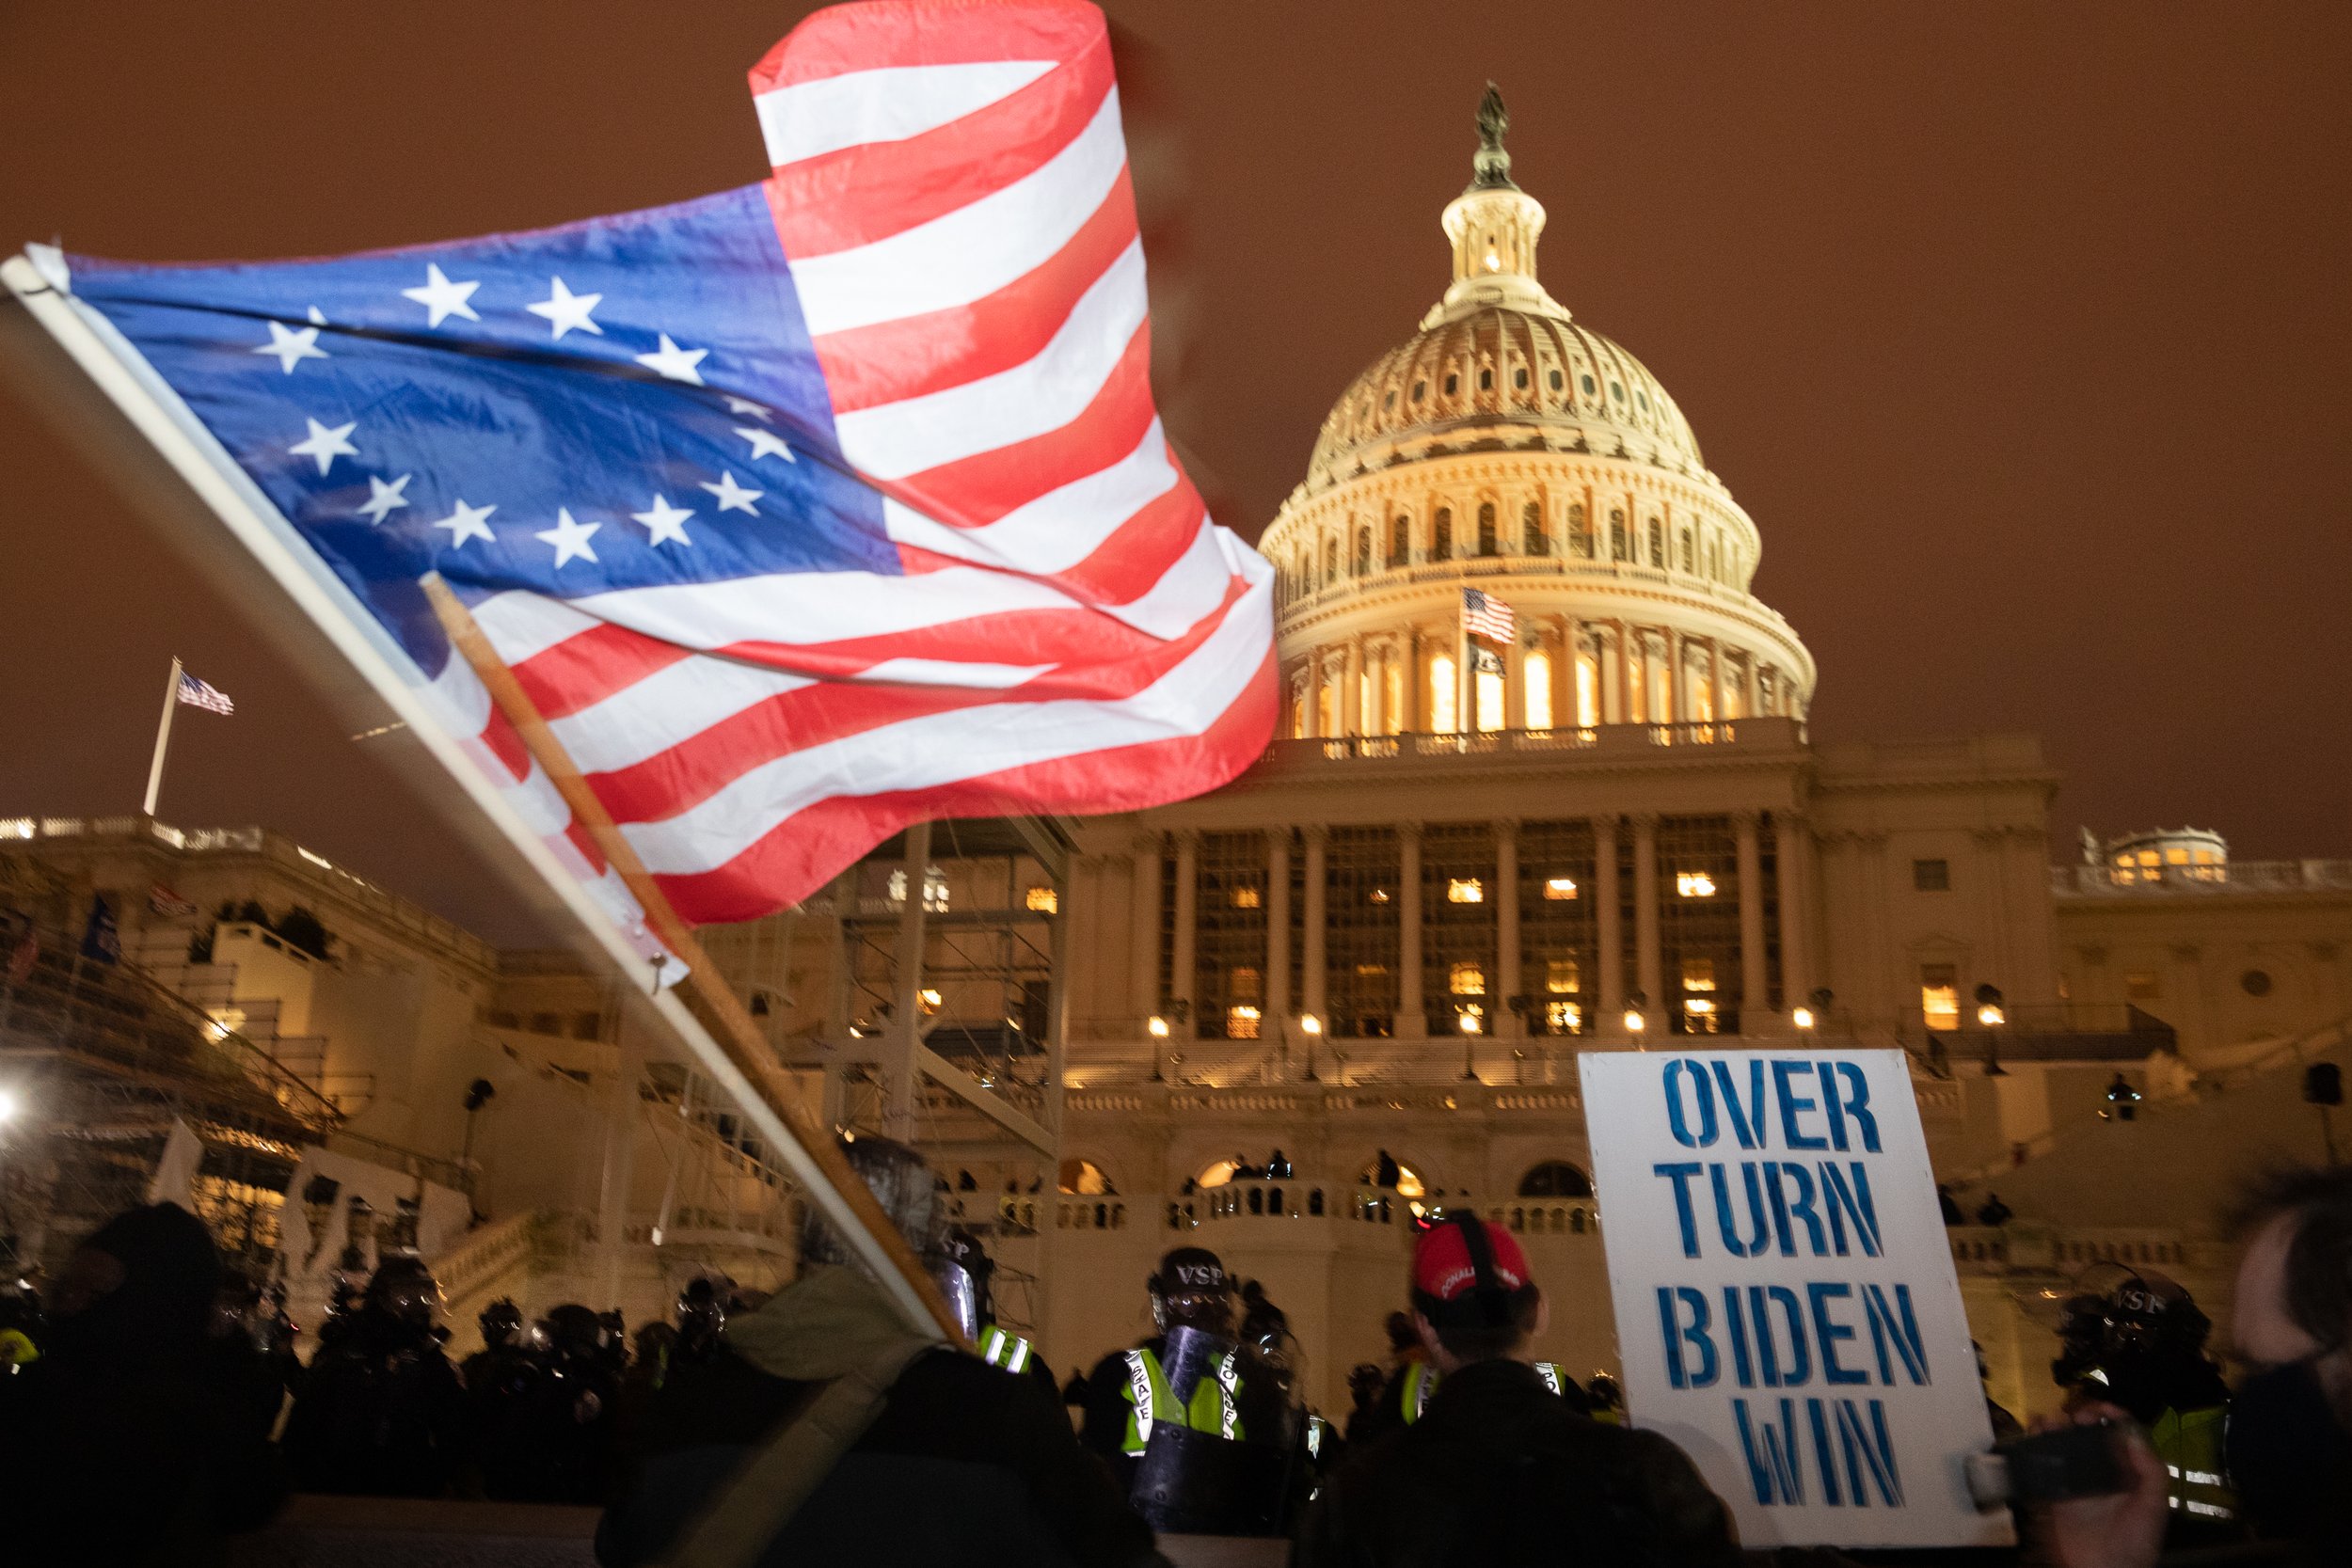  The Betsy Ross flag, sometimes used by white supremacist groups, is waved in front of the Capitol as police move in to enforce a 6:00PM curfew. Washington, D.C., 6 January 2021 